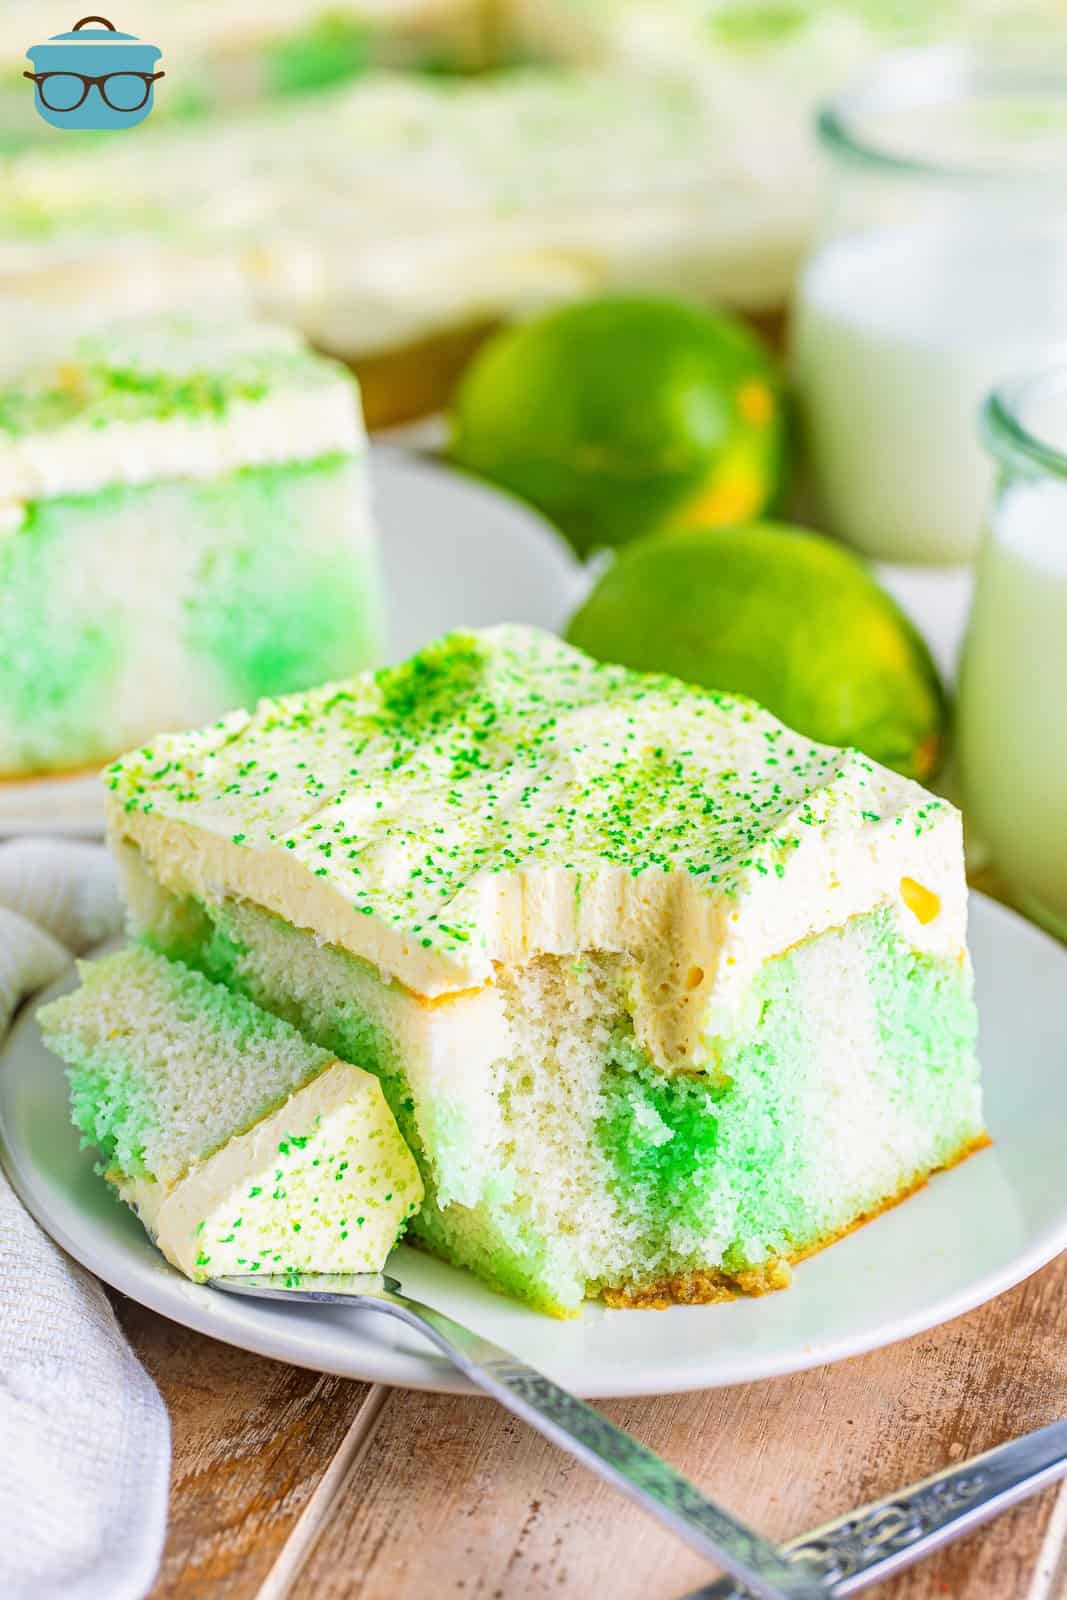 A slice of Lime Jello Poke Cake on a plate with a bite taken out.